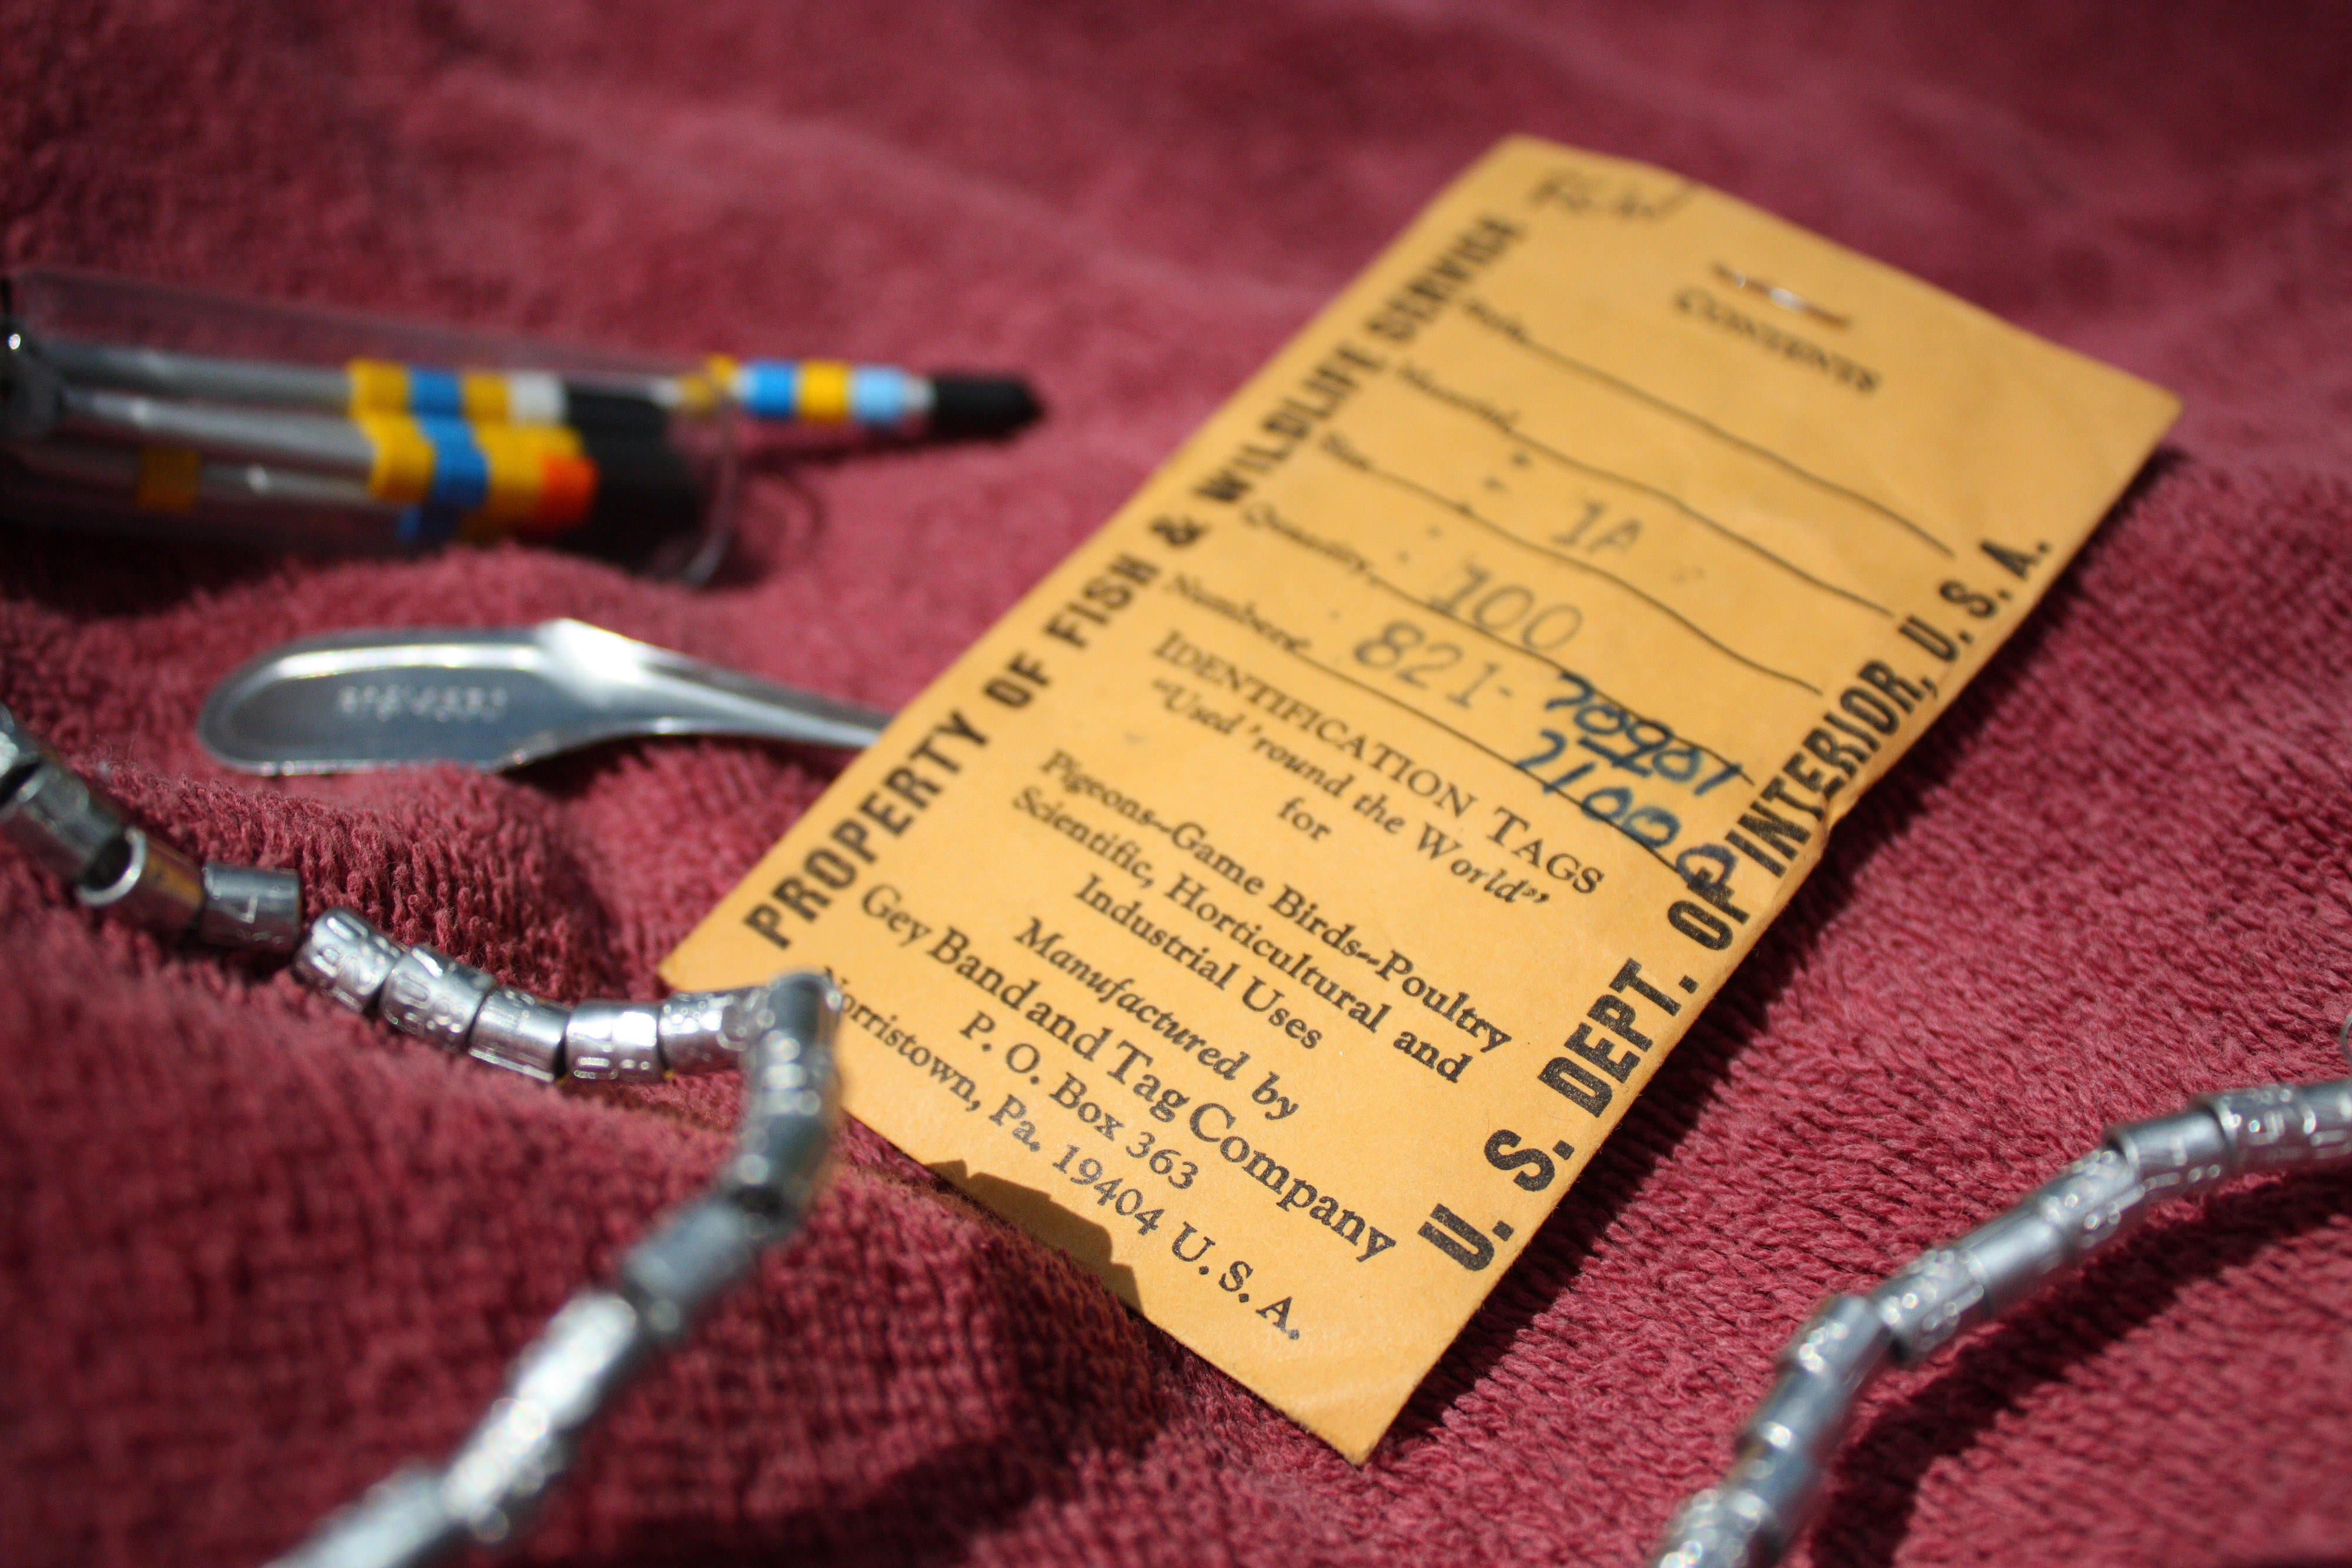 A small yellow envelope lays on a purple bath towel. It is surrounded by its contents, small silver bands used for identifying birds.